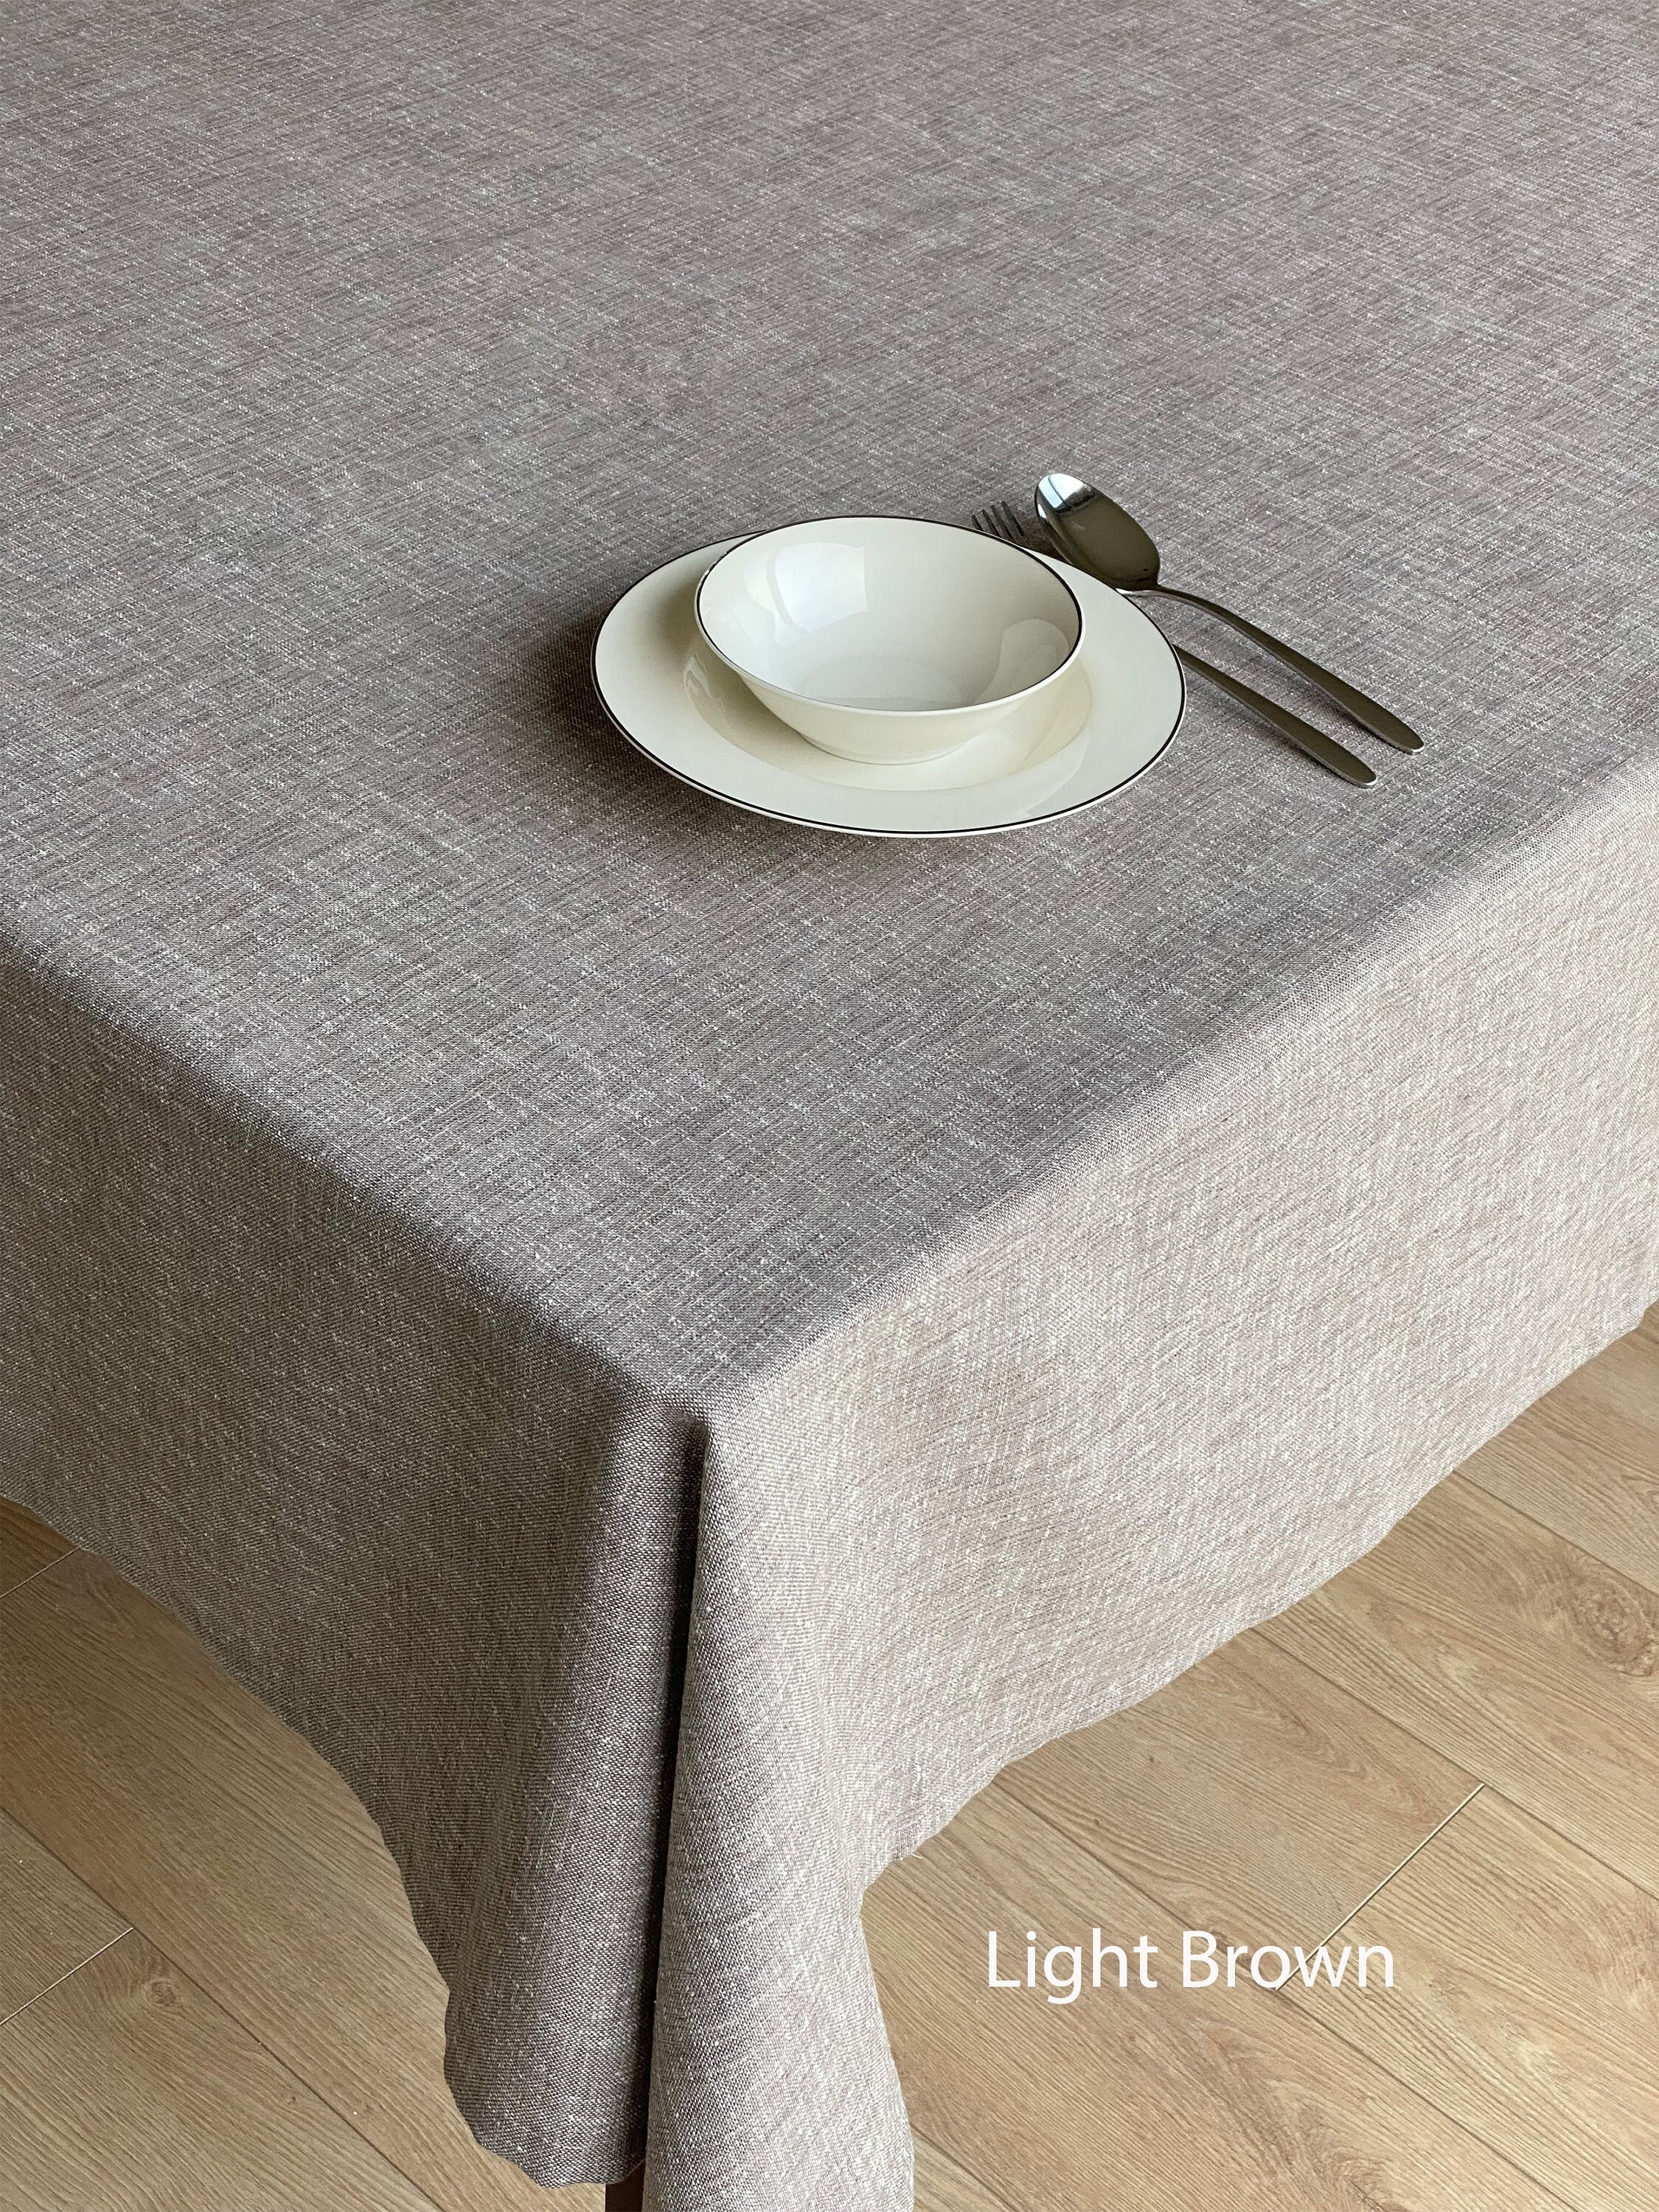 Wrinkle Free Linen Tablecloth With Mitered Corner / Color&custom Size  Options / Round, Rectangle, Square, Oval / Matching Napkins 